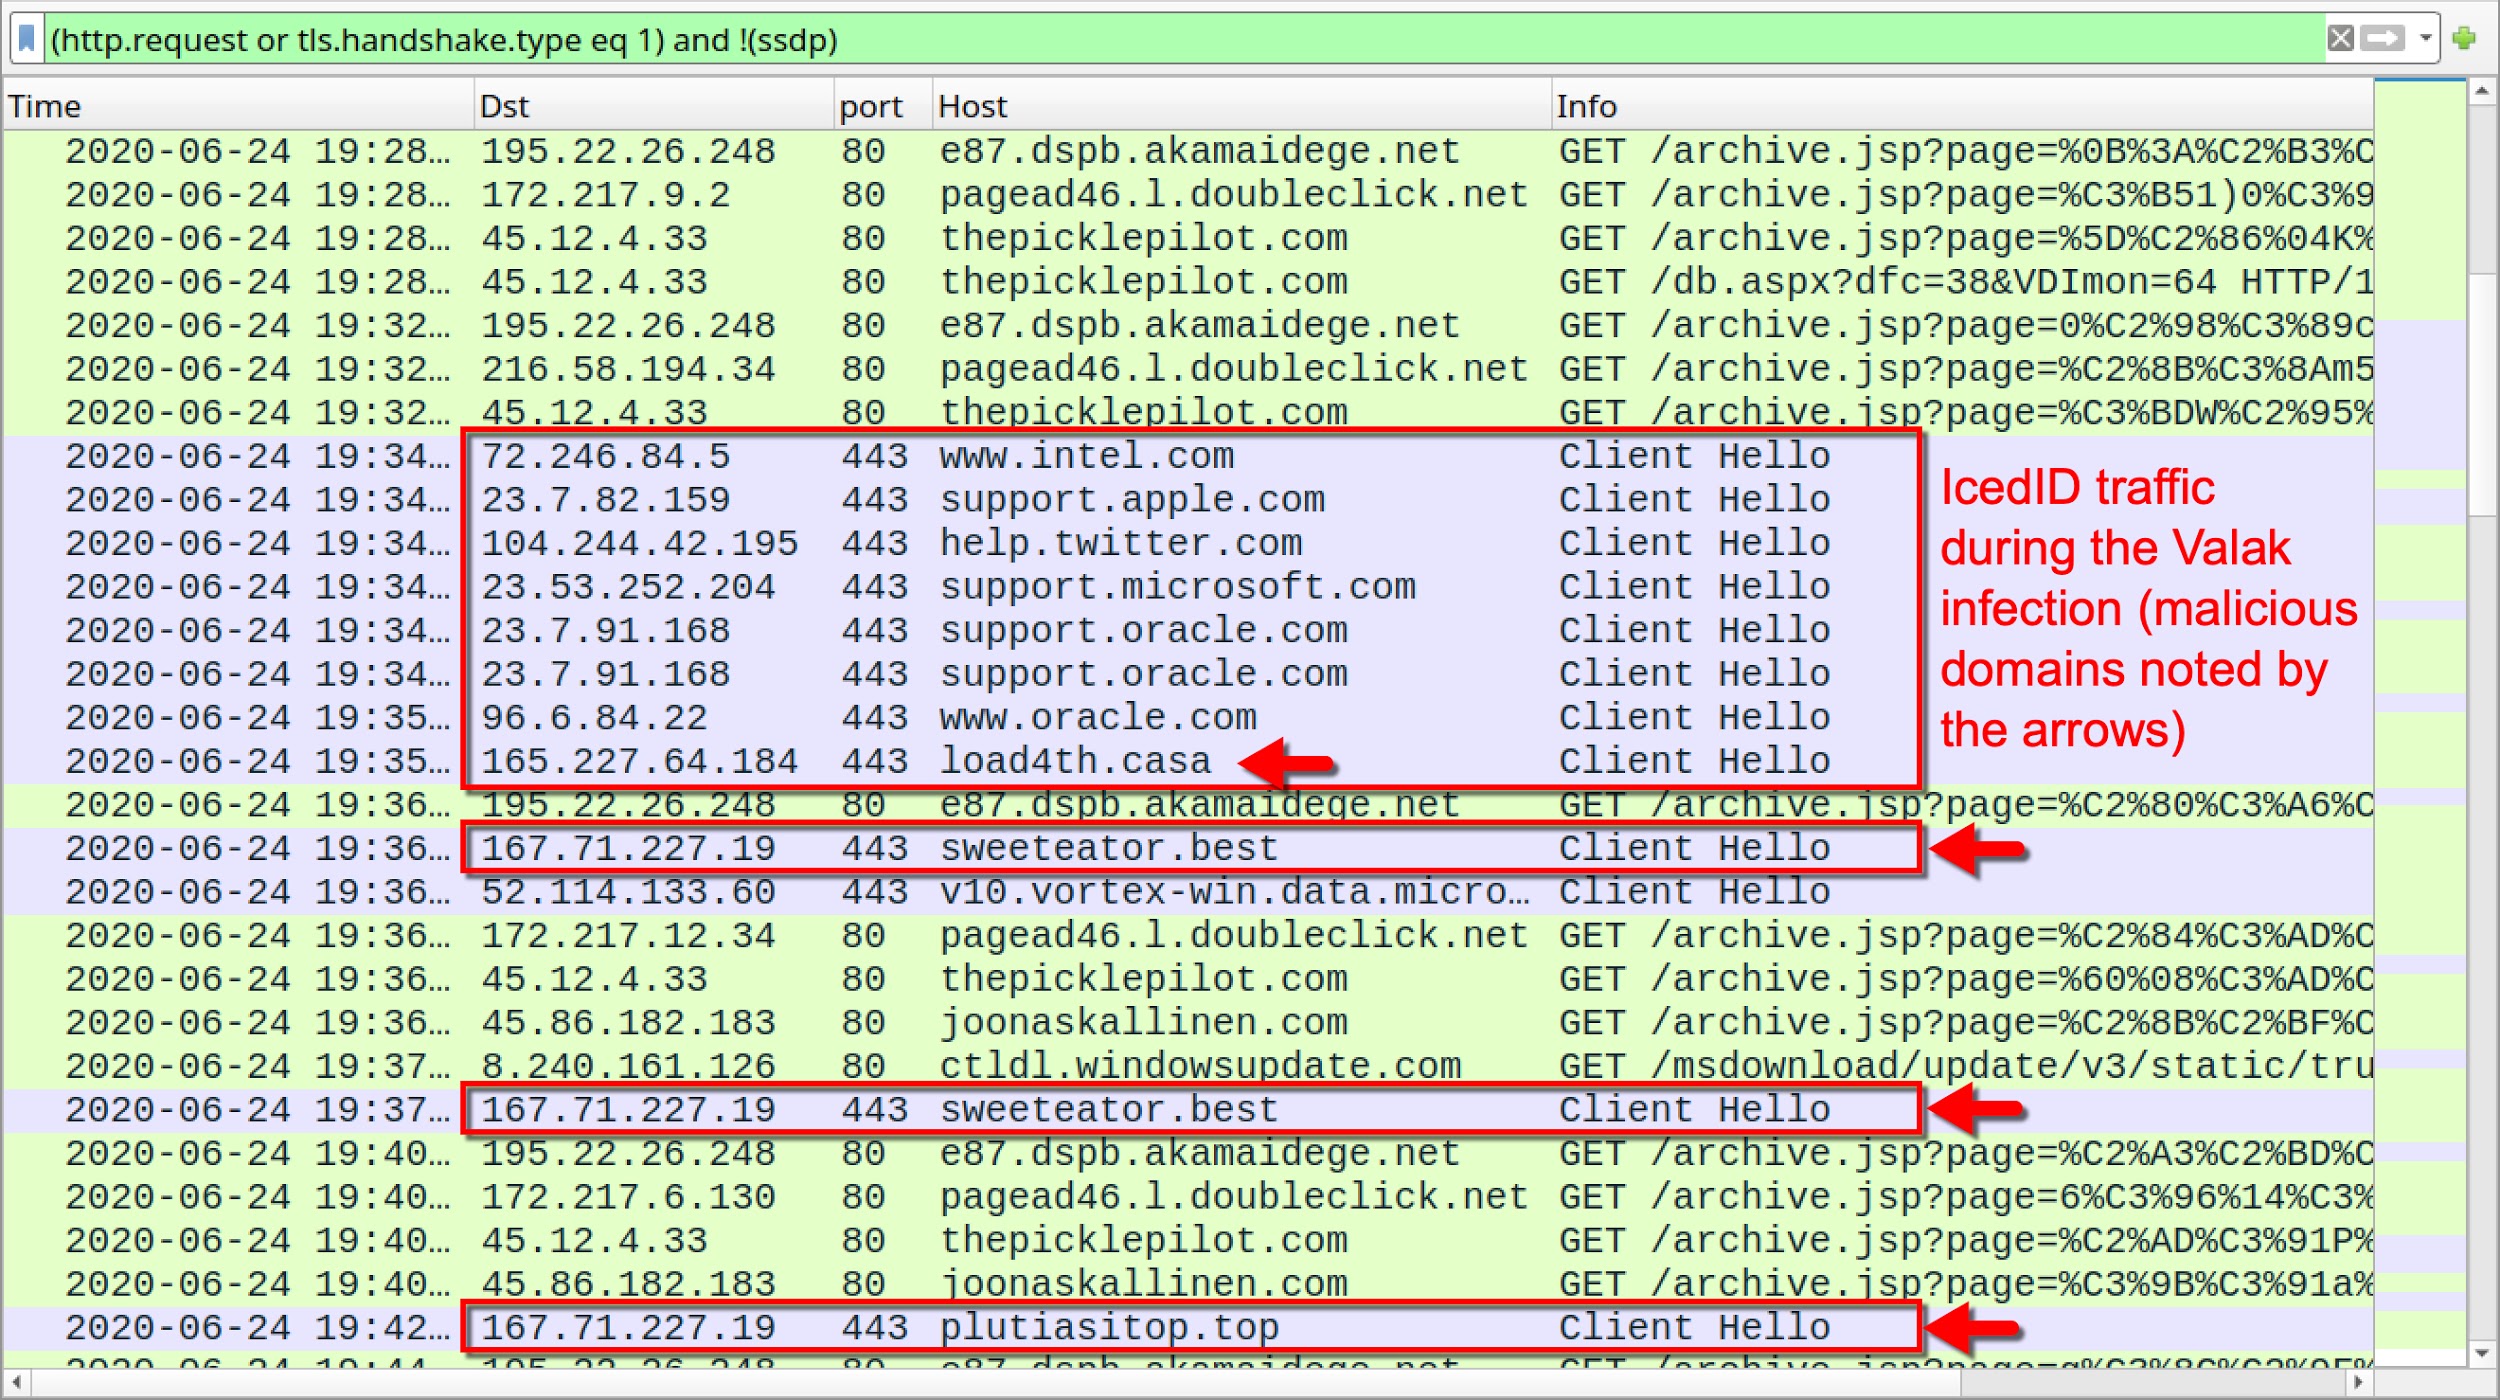 IcedID traffic during the Valak infection (malicious domains noted by the arrows in the screenshot)